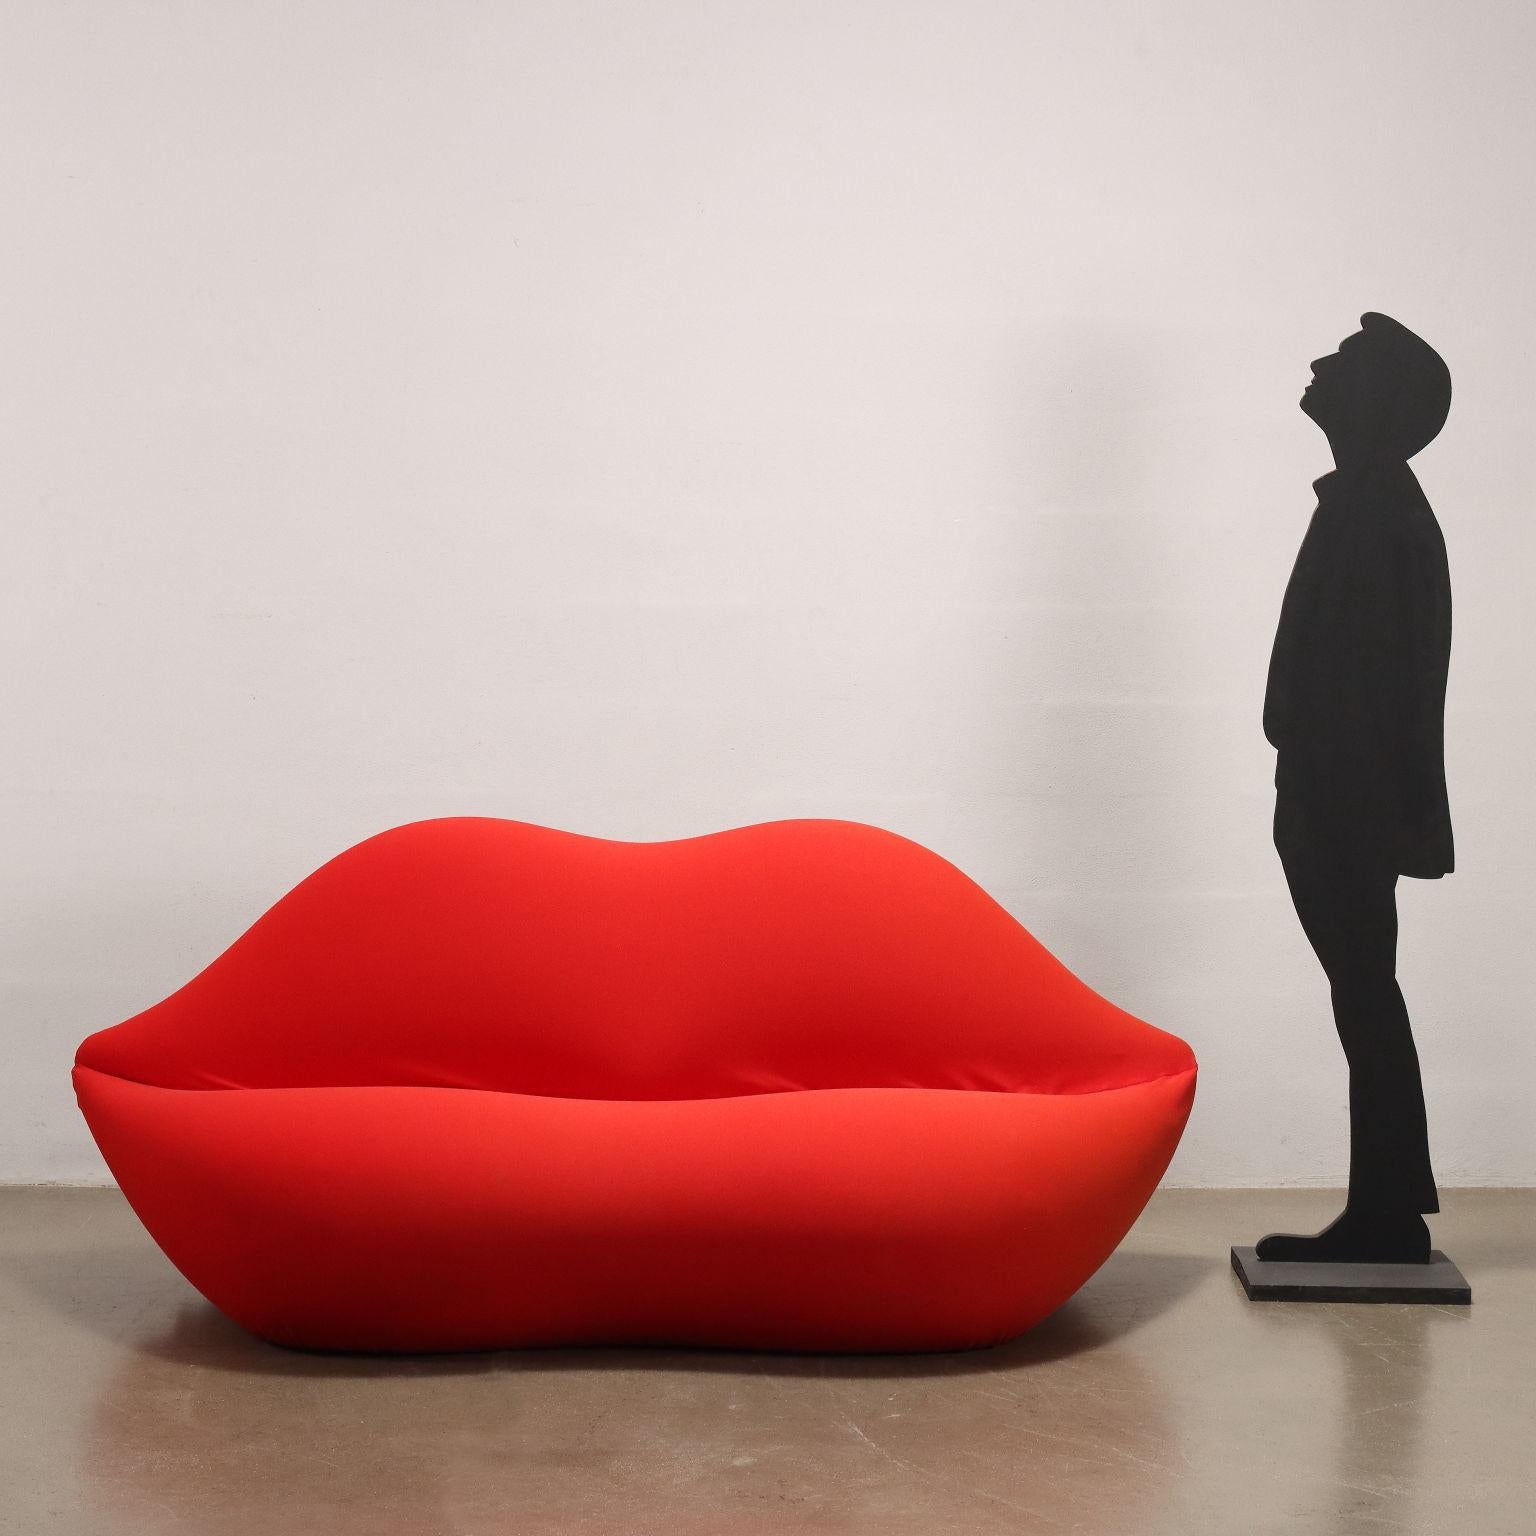 Iconic 'Bocca' model sofa designed by Studio 65 and produced by Gufram in the 1970s. Made as a tribute to Dali, specifically idea taken from Mae West's face. Padded with polyurethane foam and upholstered in red stretch fabric, the sofa is in good